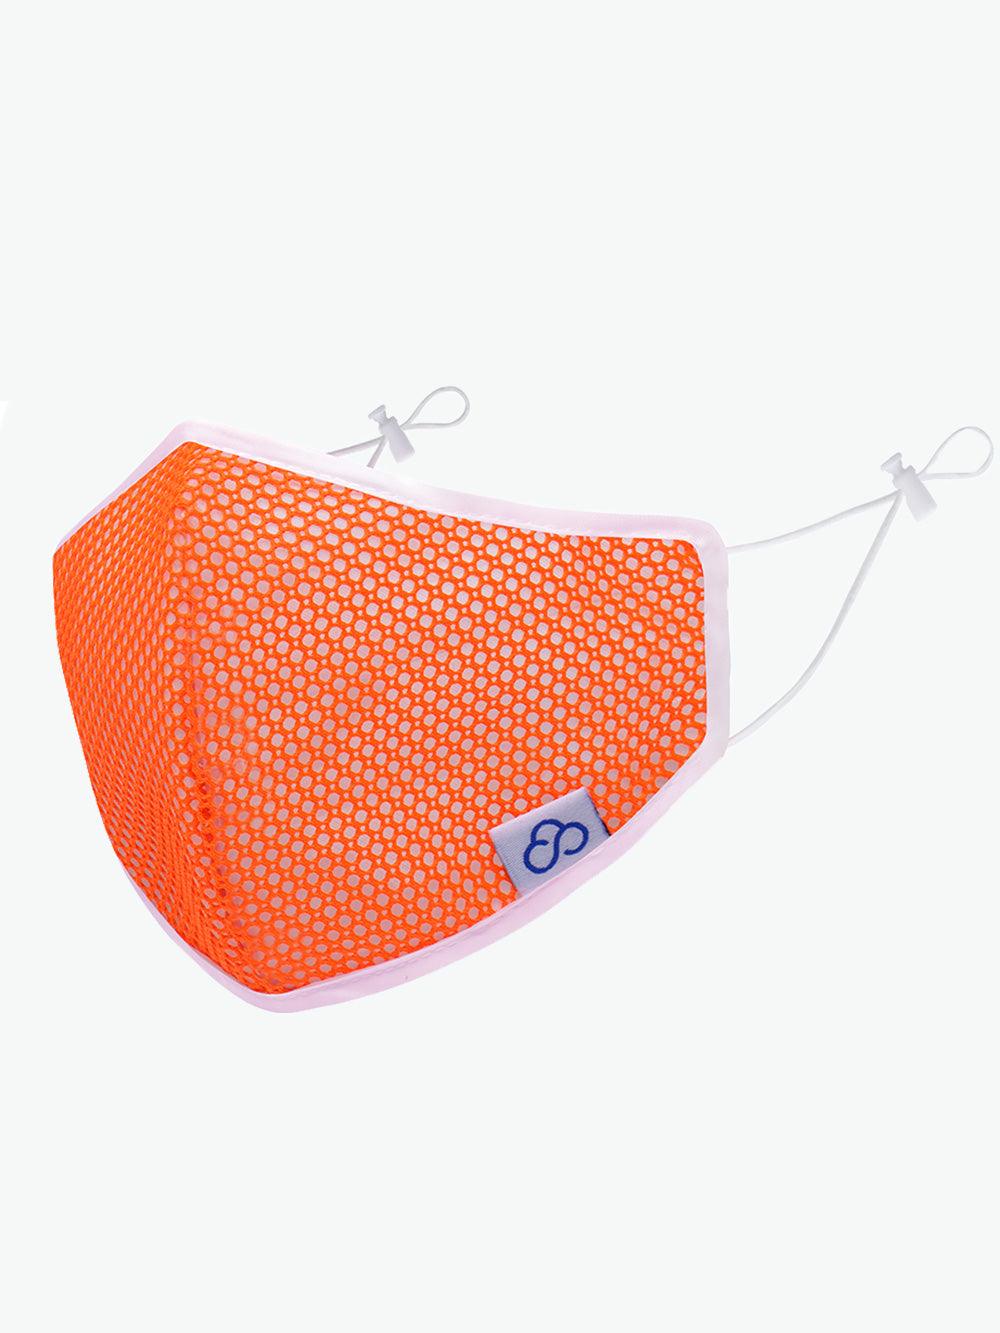 CLOUD Airflow Face Mask Sports Mesh For Youth